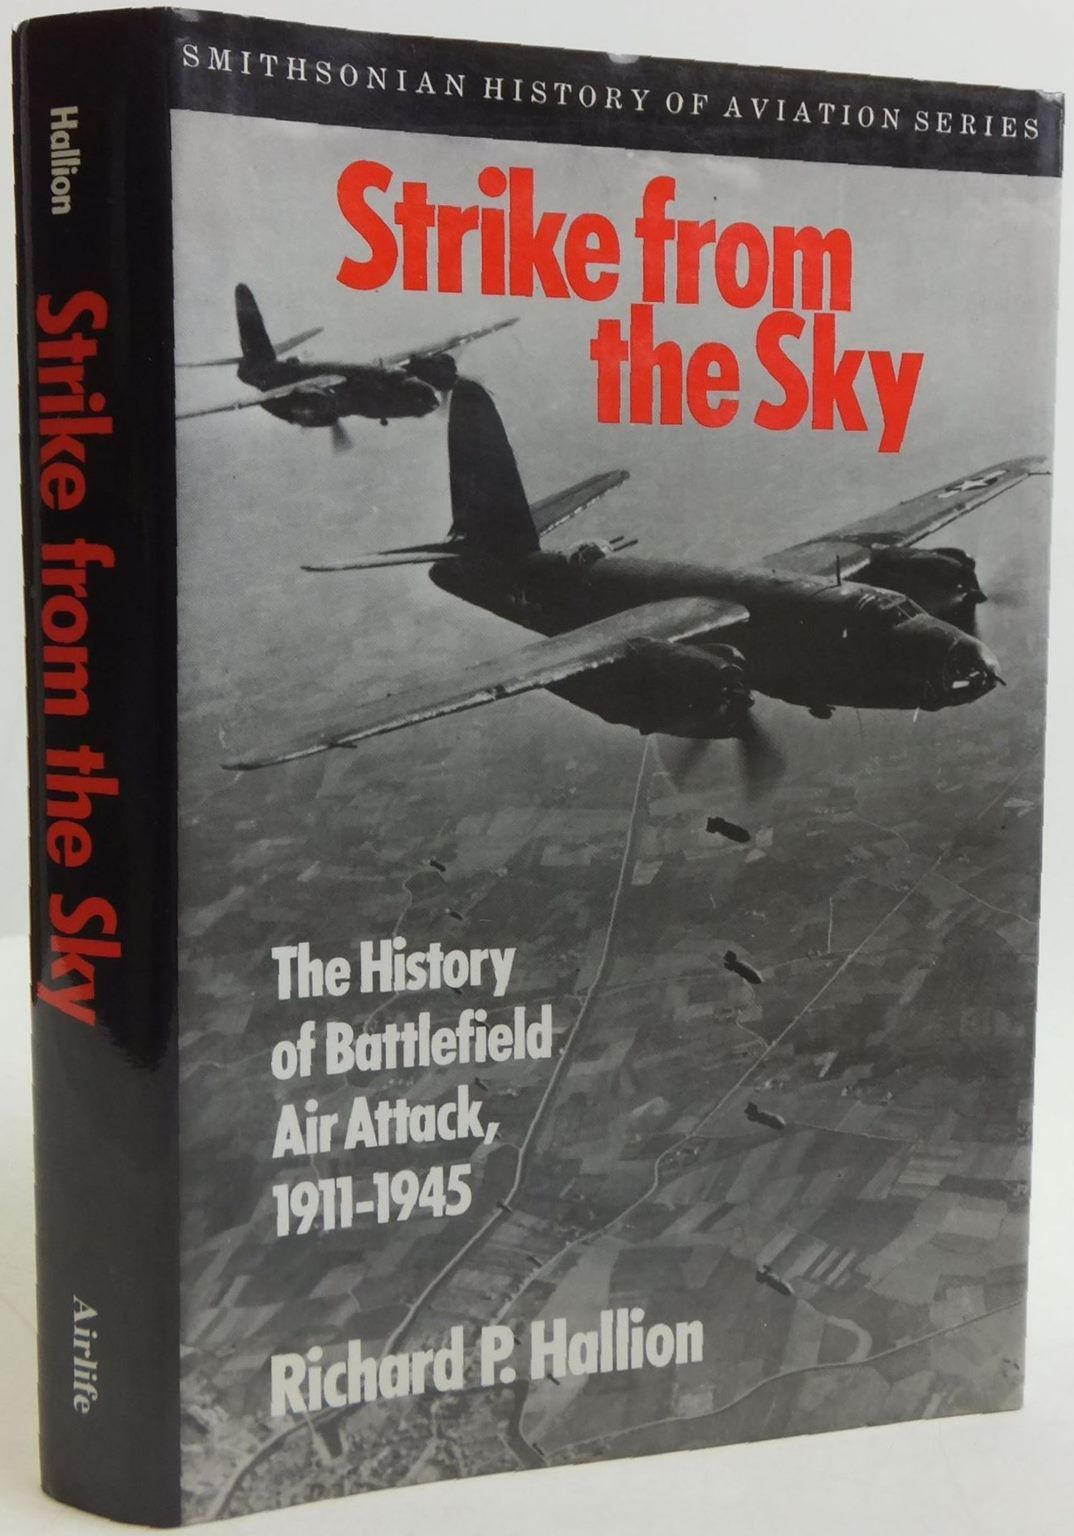 STRIKE FROM THE SKY: The History of Battlefield Air Attack 1911 - 1945